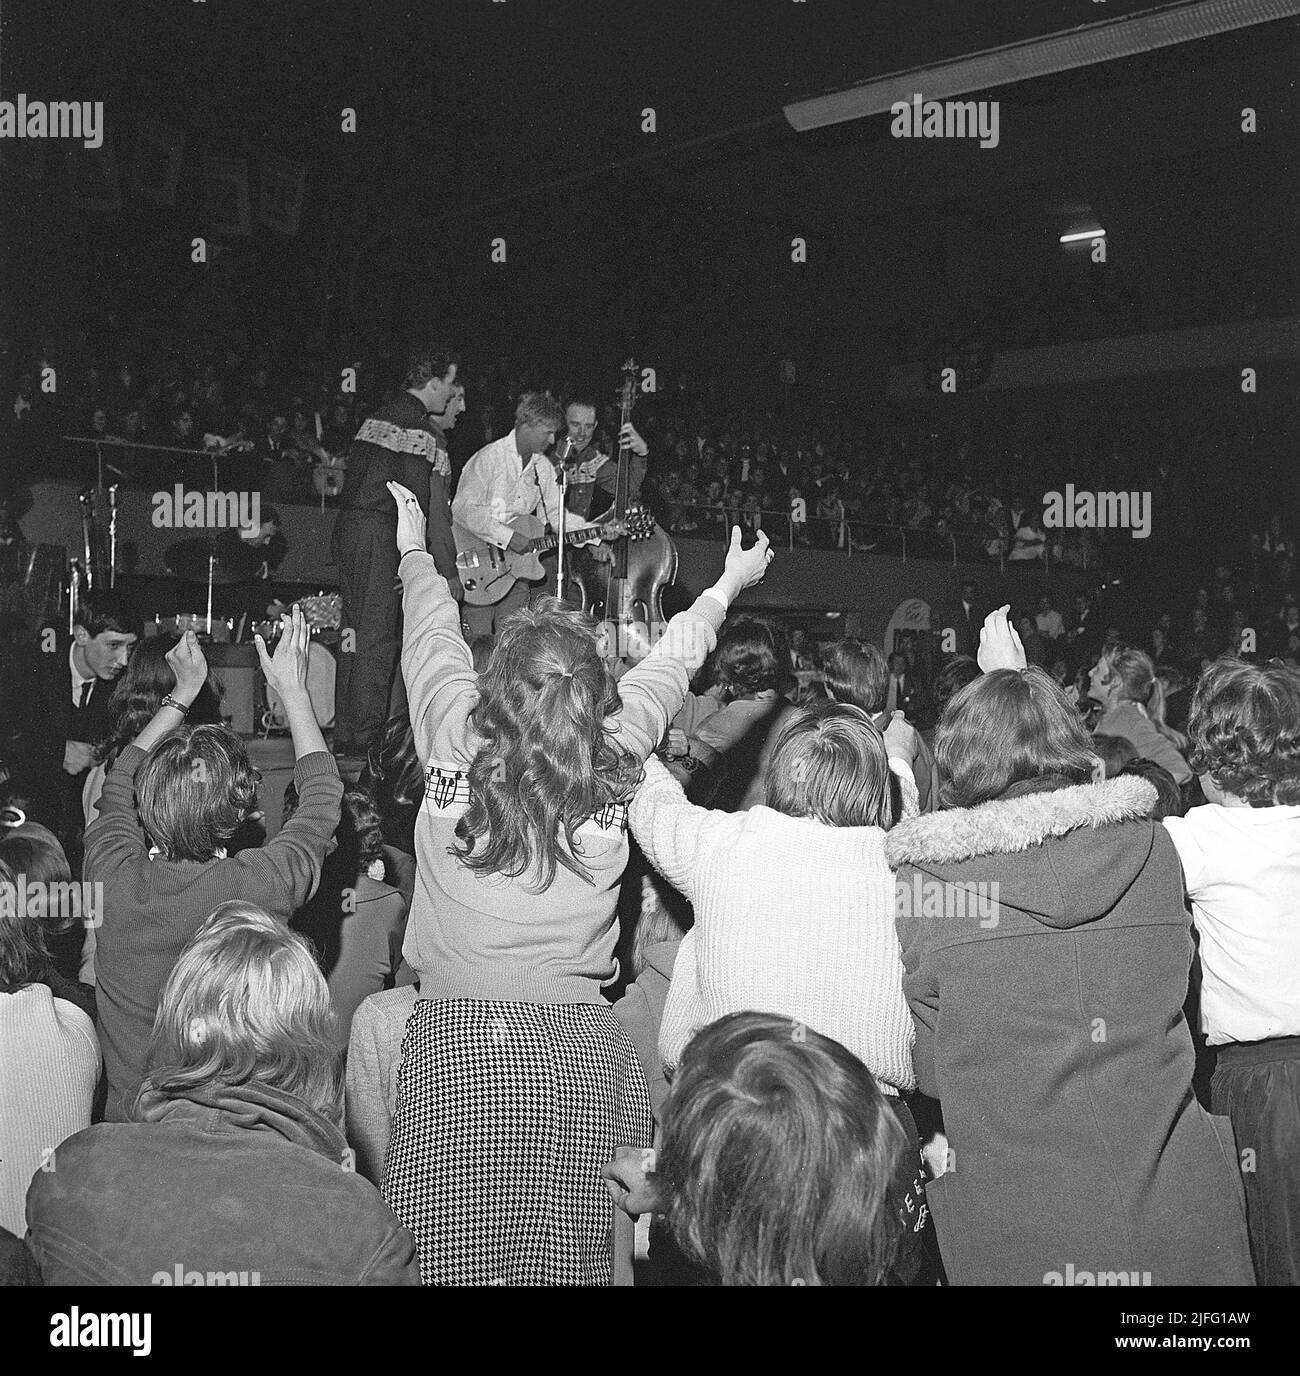 Tommy Steele. English entertainer regarded as Britain's first teen idol and rock and roll star. Born december 17 1936. Picture taken when he performed in Stockholm Sweden April 19 1958. The audience is visibly exited. Stock Photo